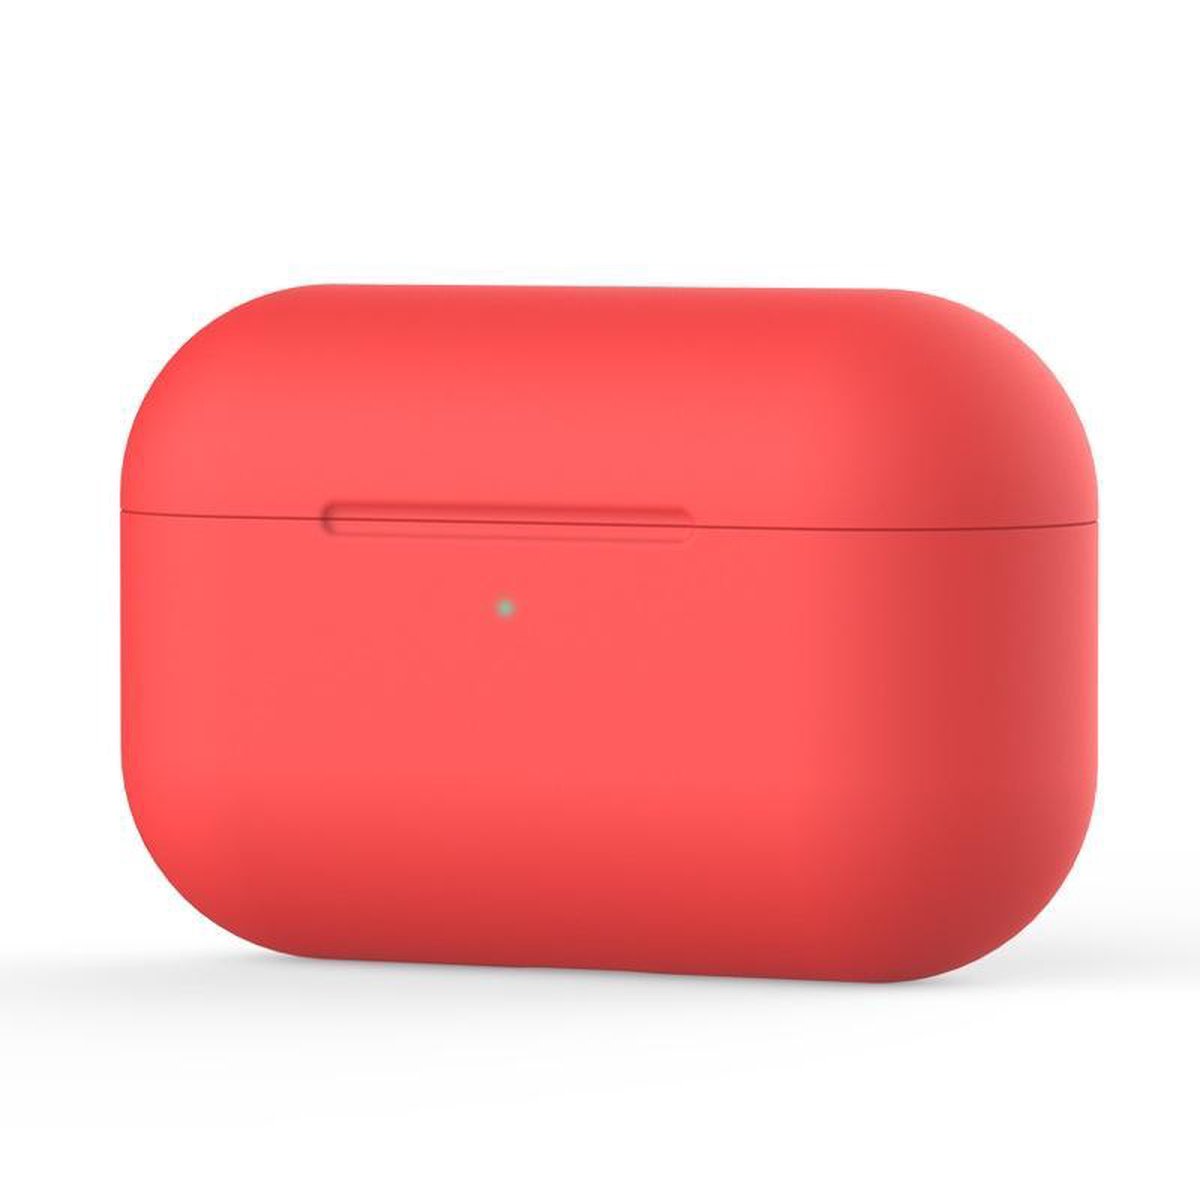 Siliconen Case Apple AirPods Pro rood- AirPods hoesje rood - AirPods case